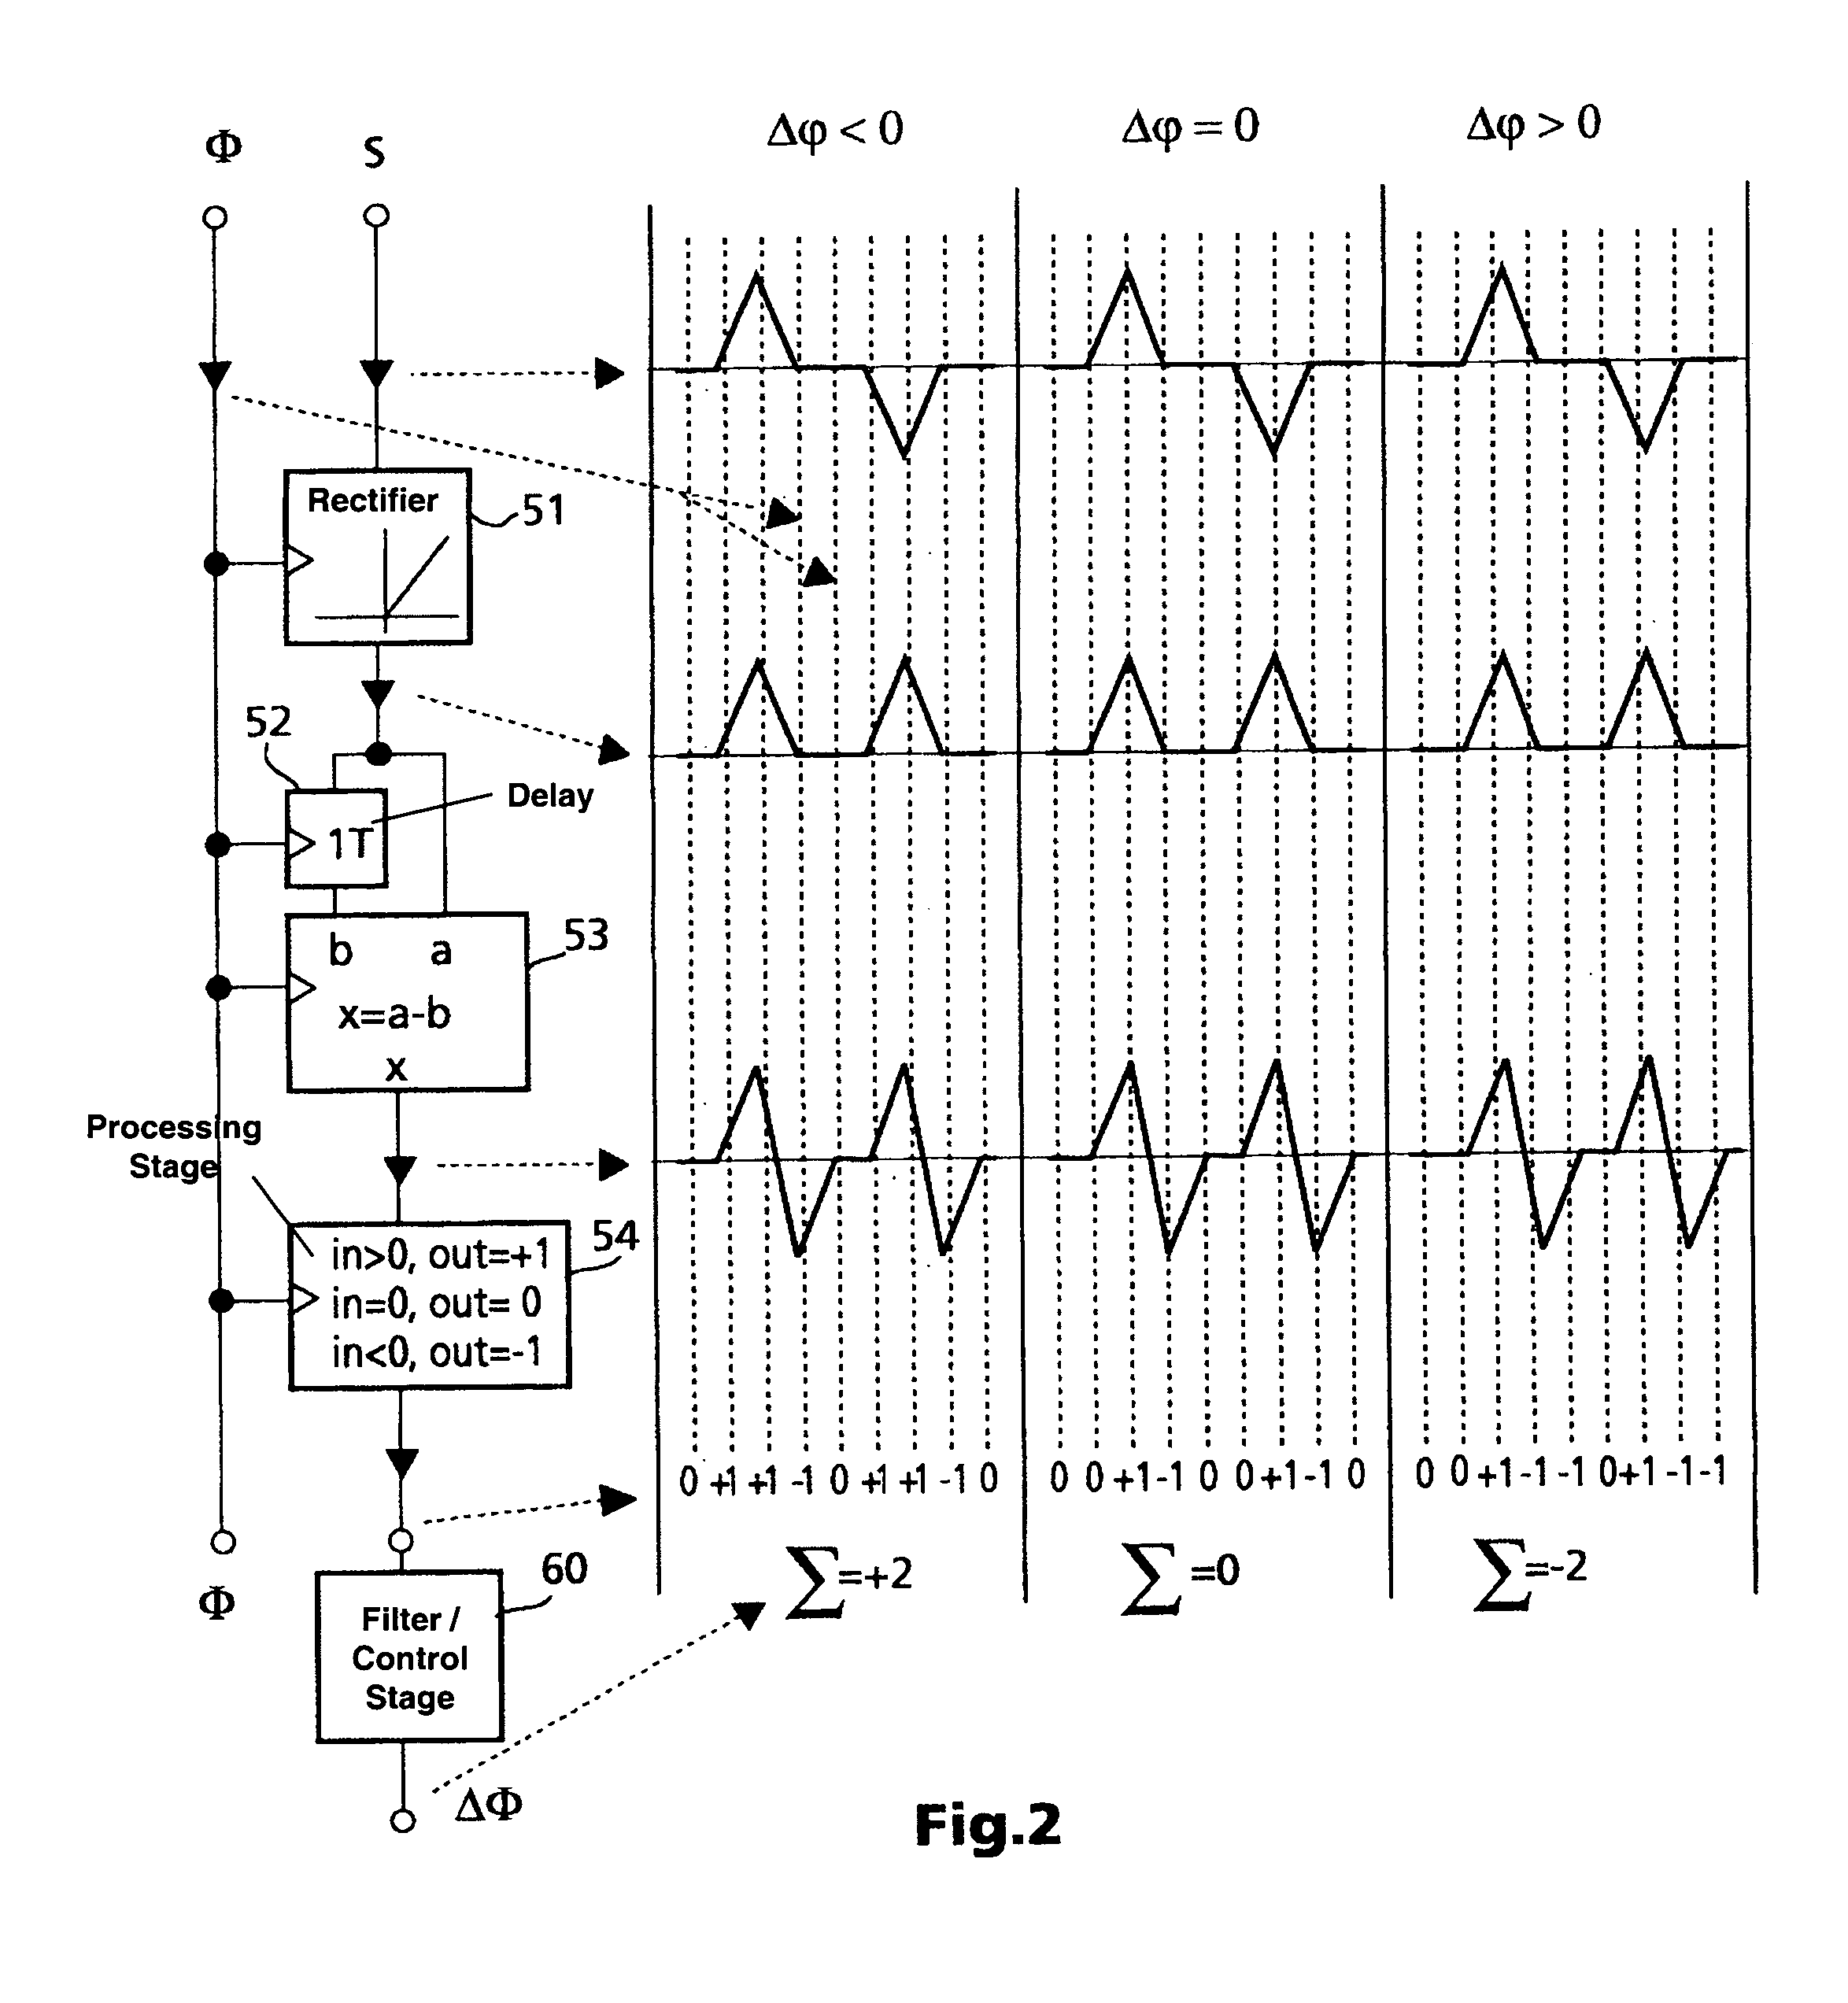 Phase detector for a phase-locked loop